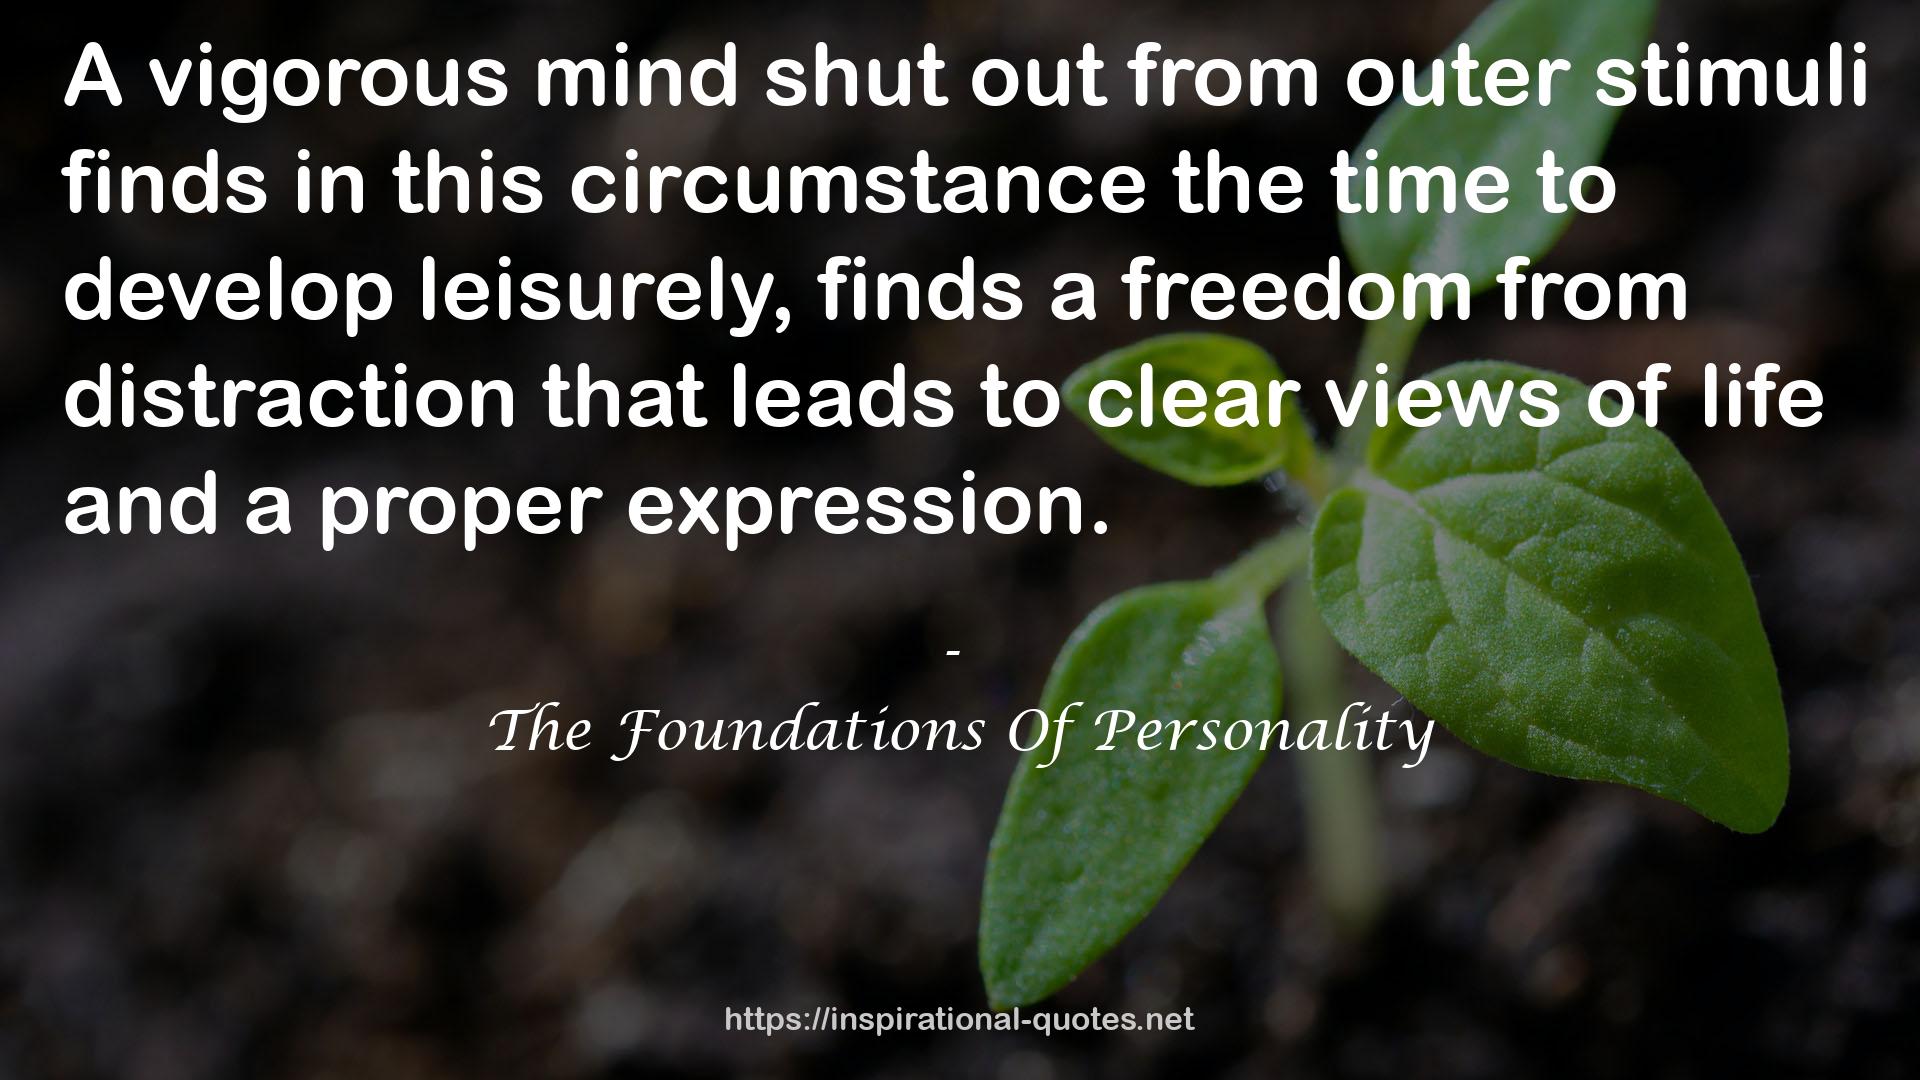 The Foundations Of Personality QUOTES